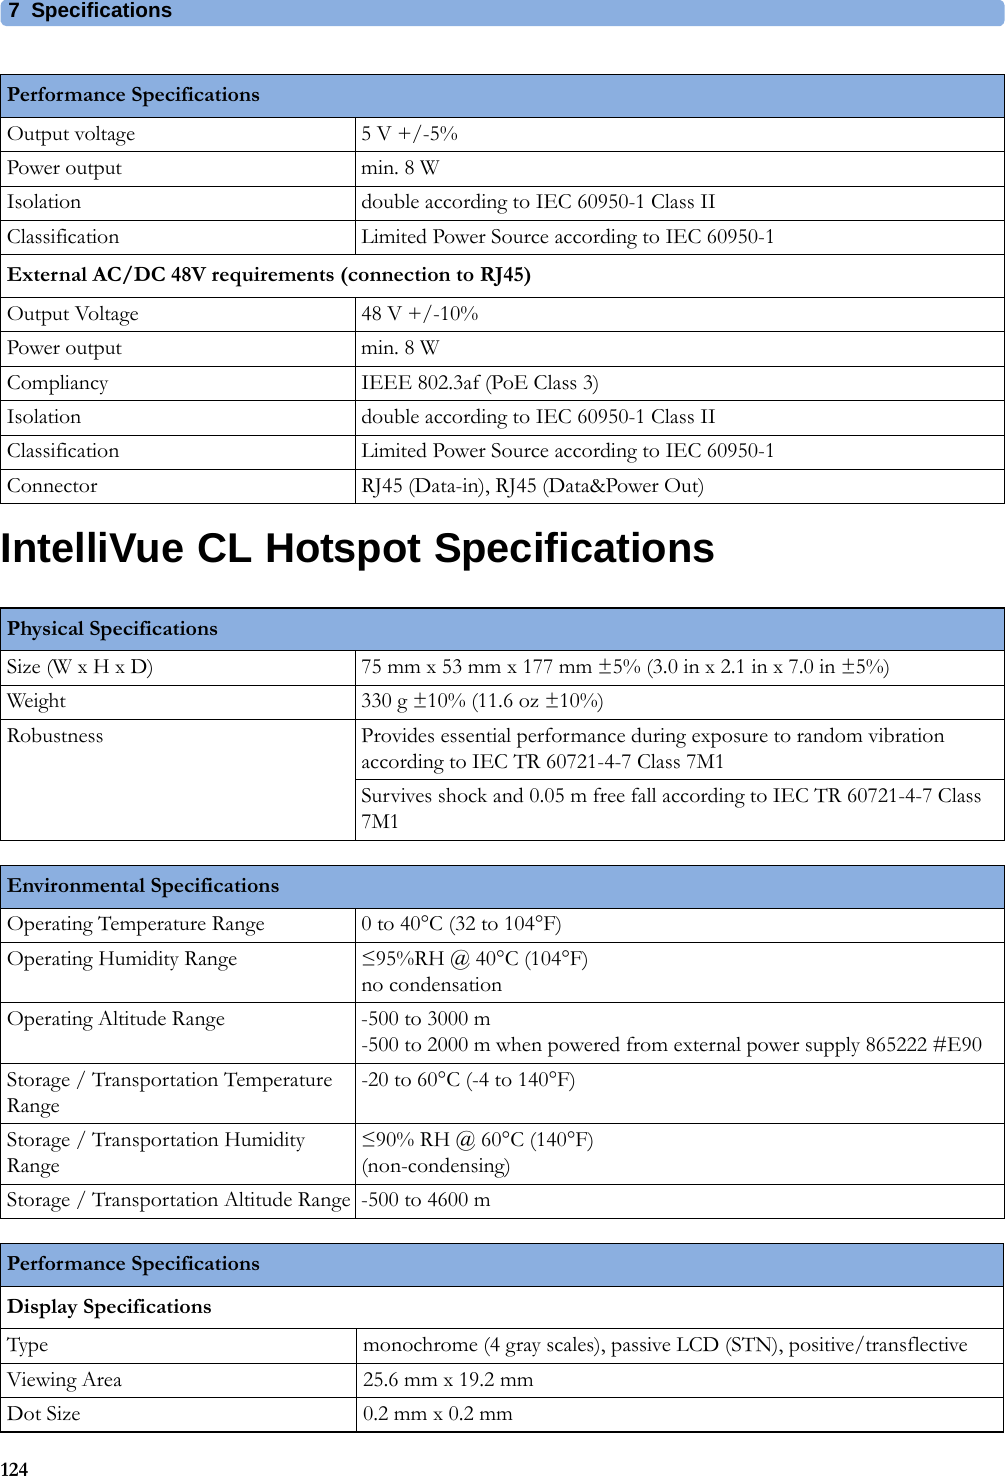 7 Specifications124IntelliVue CL Hotspot SpecificationsOutput voltage 5 V +/-5%Power output min. 8 WIsolation double according to IEC 60950-1 Class IIClassification Limited Power Source according to IEC 60950-1External AC/DC 48V requirements (connection to RJ45)Output Voltage 48 V +/-10%Power output min. 8 WCompliancy IEEE 802.3af (PoE Class 3)Isolation double according to IEC 60950-1 Class IIClassification Limited Power Source according to IEC 60950-1Connector RJ45 (Data-in), RJ45 (Data&amp;Power Out)Performance SpecificationsPhysical SpecificationsSize (W x H x D) 75 mm x 53 mm x 177 mm ±5% (3.0 in x 2.1 in x 7.0 in ±5%)Weight 330 g ±10% (11.6 oz ±10%)Robustness Provides essential performance during exposure to random vibration according to IEC TR 60721-4-7 Class 7M1Survives shock and 0.05 m free fall according to IEC TR 60721-4-7 Class 7M1Environmental SpecificationsOperating Temperature Range 0 to 40°C (32 to 104°F)Operating Humidity Range ≤95%RH @ 40°C (104°F)no condensationOperating Altitude Range -500 to 3000 m-500 to 2000 m when powered from external power supply 865222 #E90Storage / Transportation Temperature Range-20 to 60°C (-4 to 140°F)Storage / Transportation Humidity Range≤90% RH @ 60°C (140°F)(non-condensing)Storage / Transportation Altitude Range -500 to 4600 mPerformance SpecificationsDisplay SpecificationsType monochrome (4 gray scales), passive LCD (STN), positive/transflectiveViewing Area 25.6 mm x 19.2 mmDot Size 0.2 mm x 0.2 mm